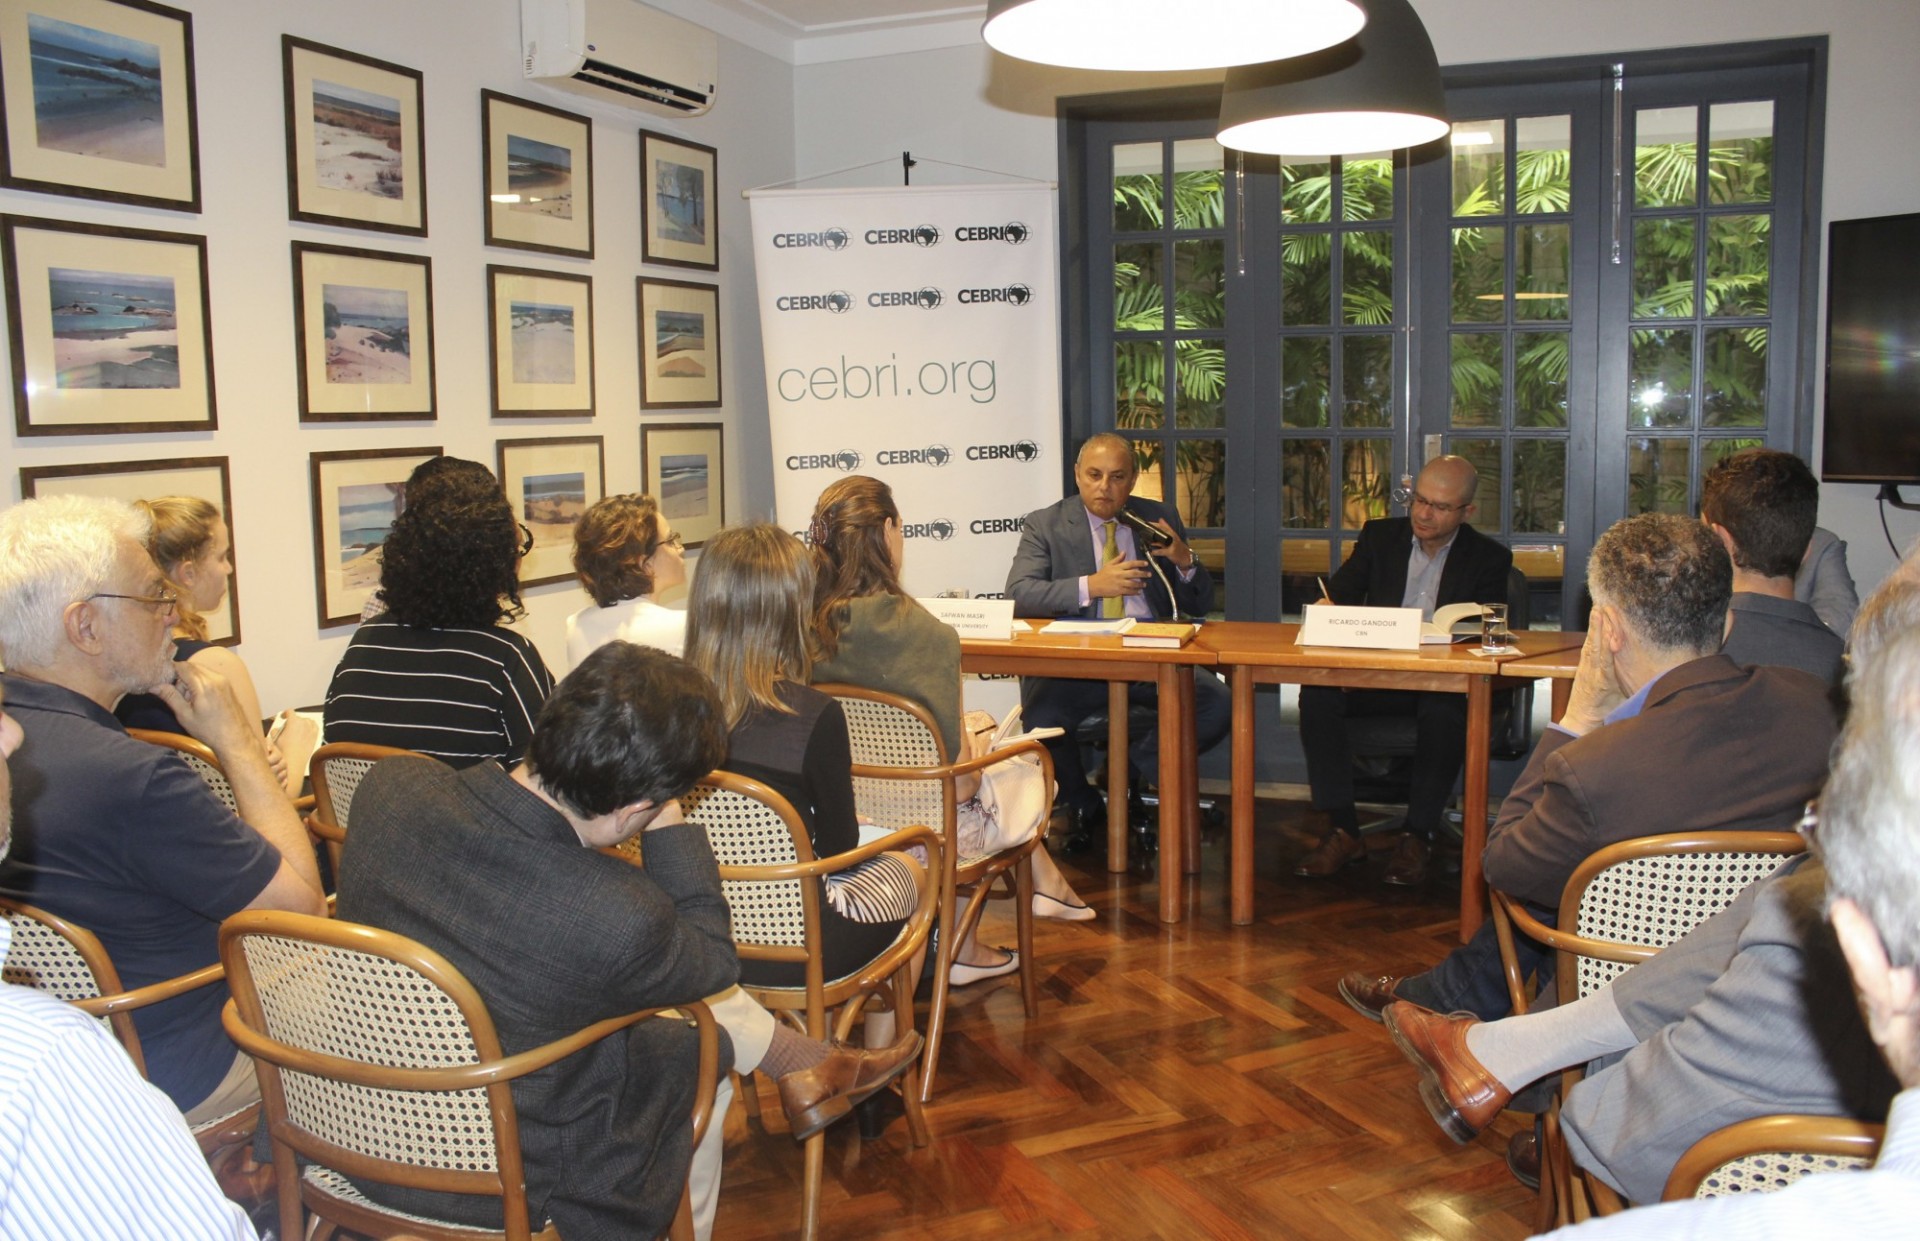 Safwan Masri during the launch of his book "Tunisia: An Arab Anomally" in Rio